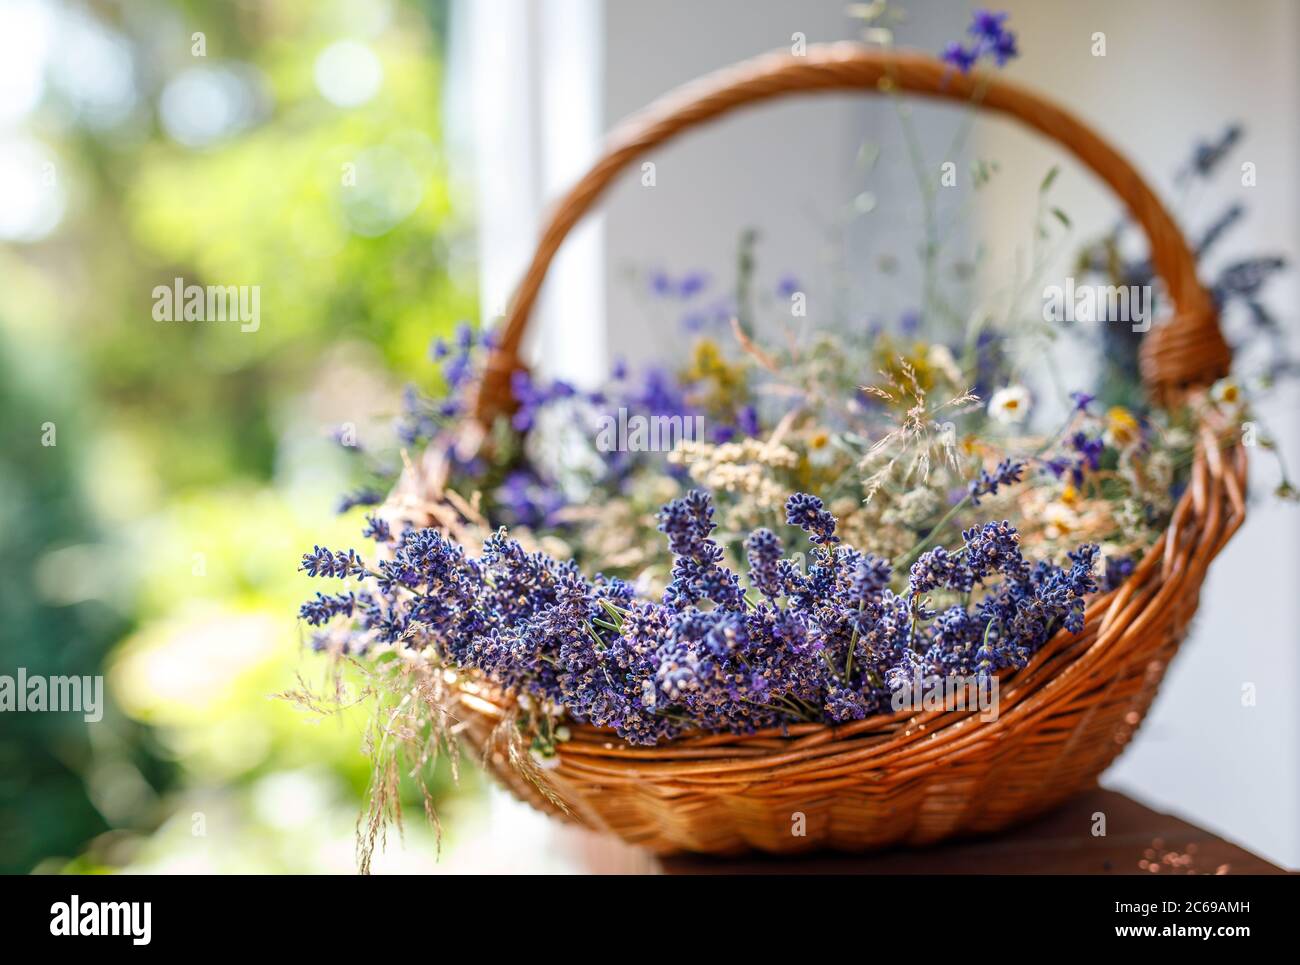 Rural idyll. Lavender flower bouquets in the basket with sunny blurred background. Stock Photo